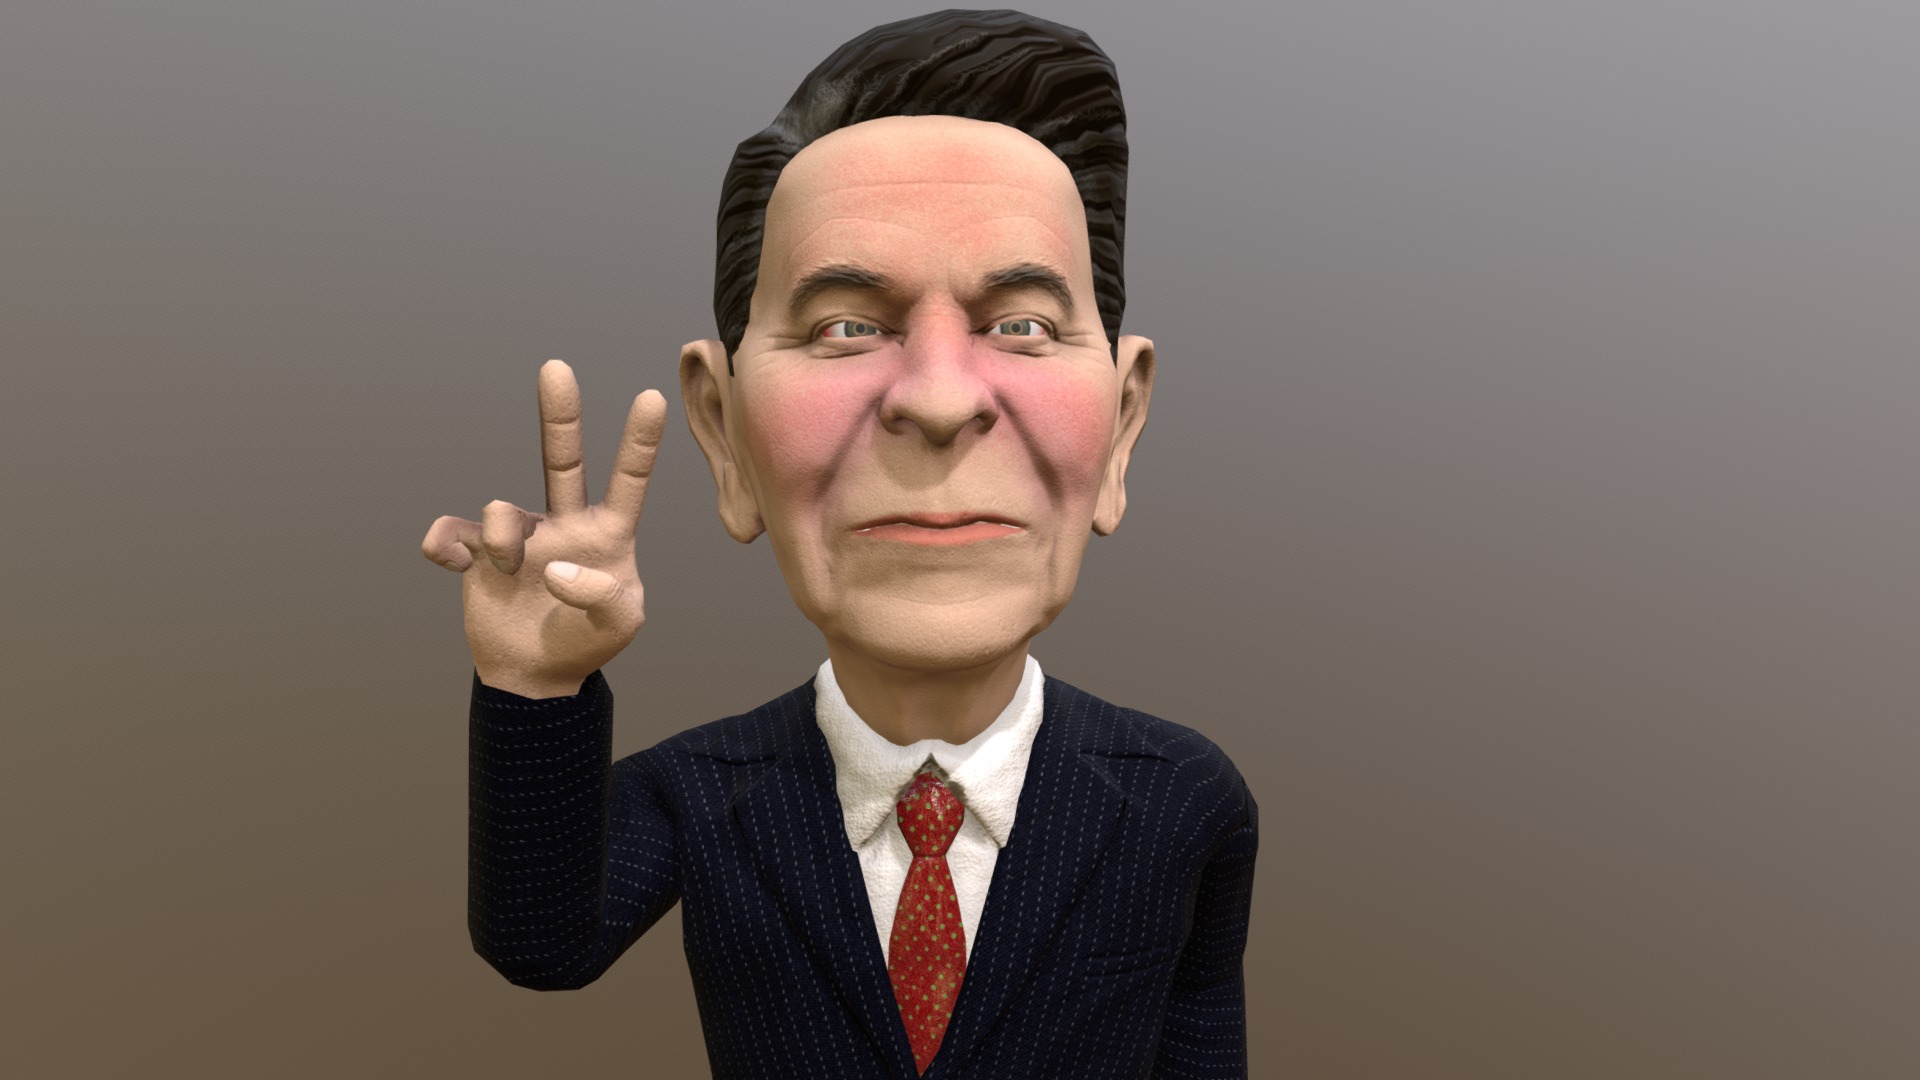 3D model Ronald Reagan caricature - This is a 3D model of the Ronald Reagan caricature. The 3D model is about a man in a suit and tie.